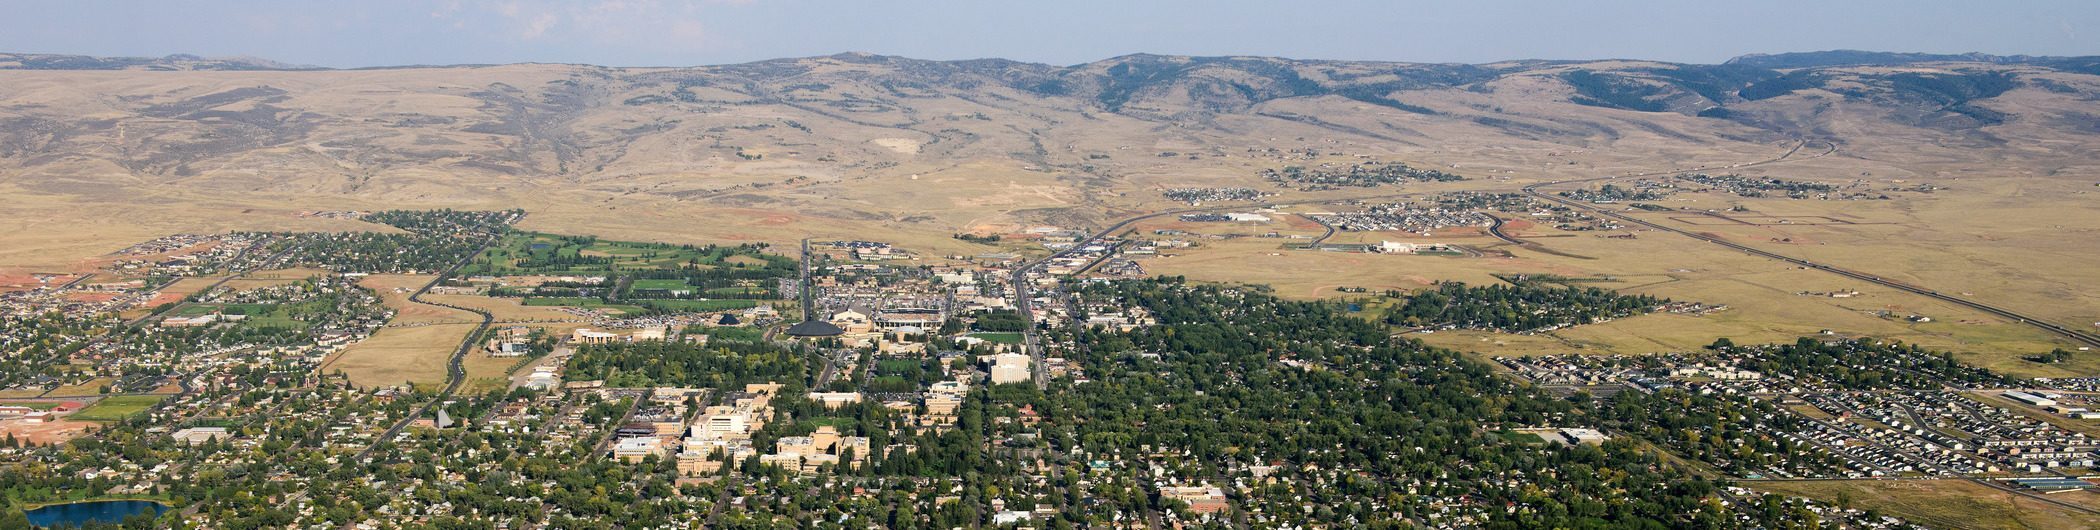 an aerial view of the city of Laramie with houses in the foreground and the plains and mountains in the distance